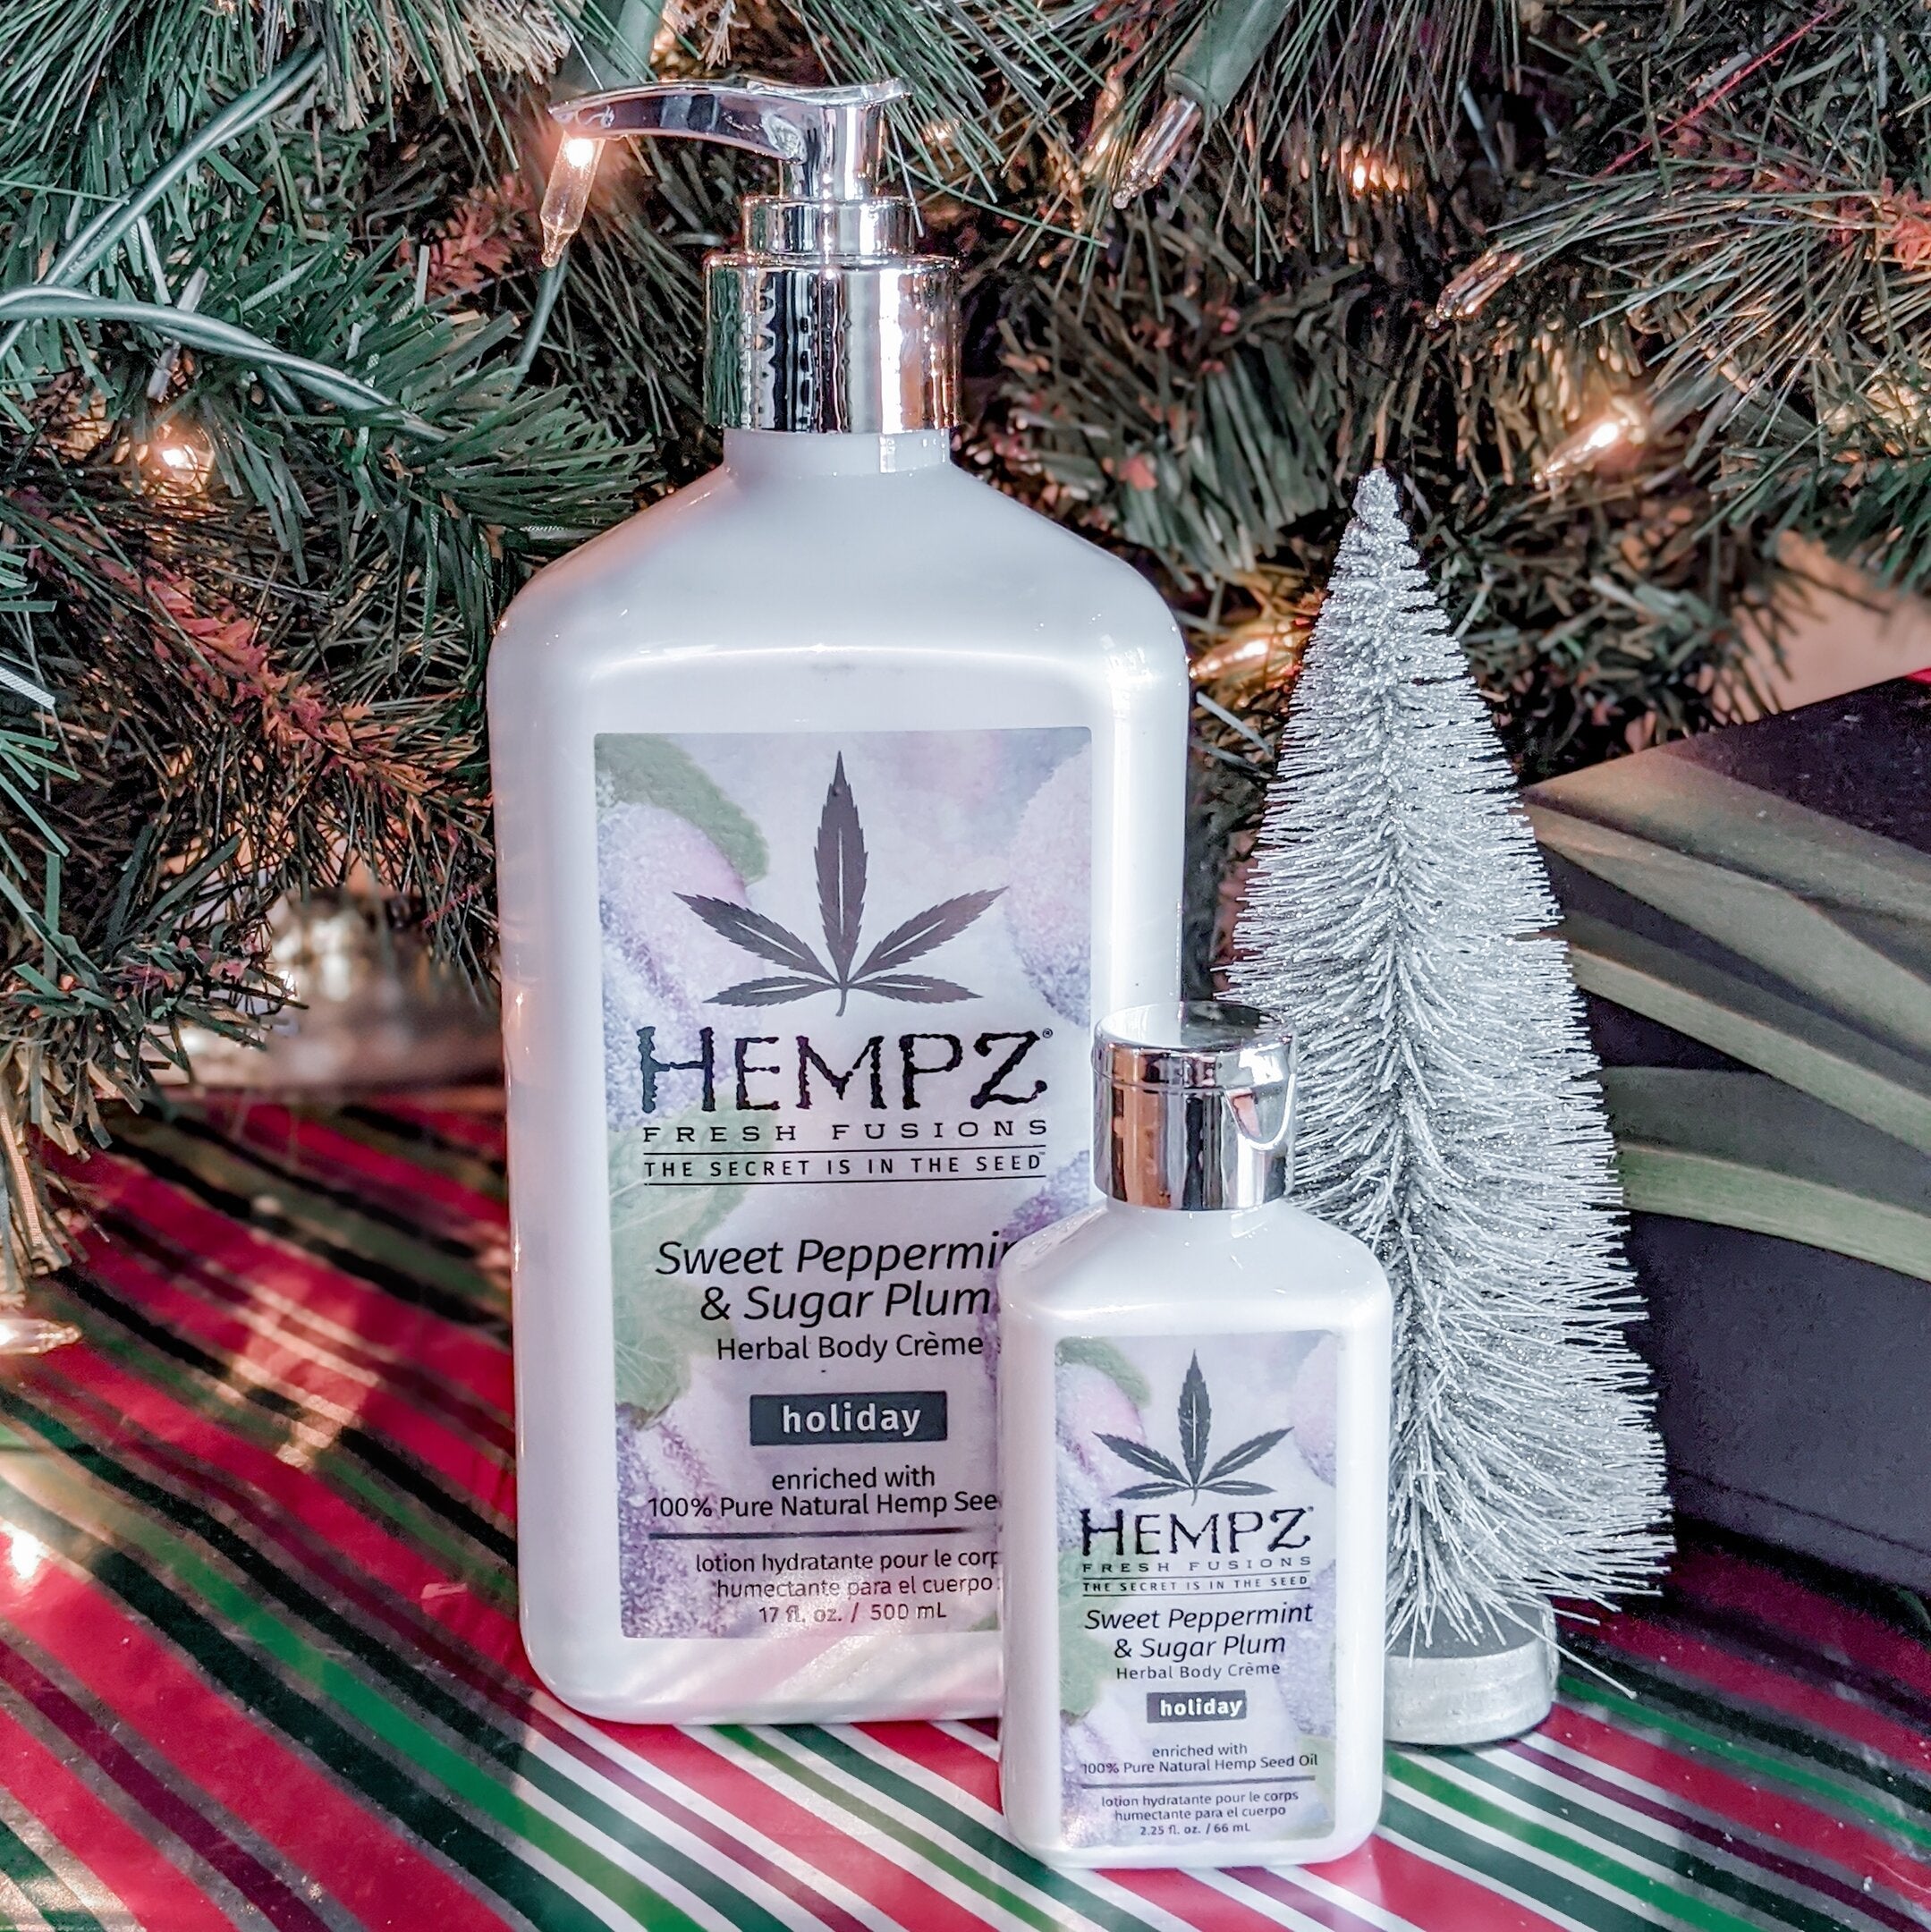 Hempz Holiday Trio Gift Sweet Peppermint and Sugar Plum